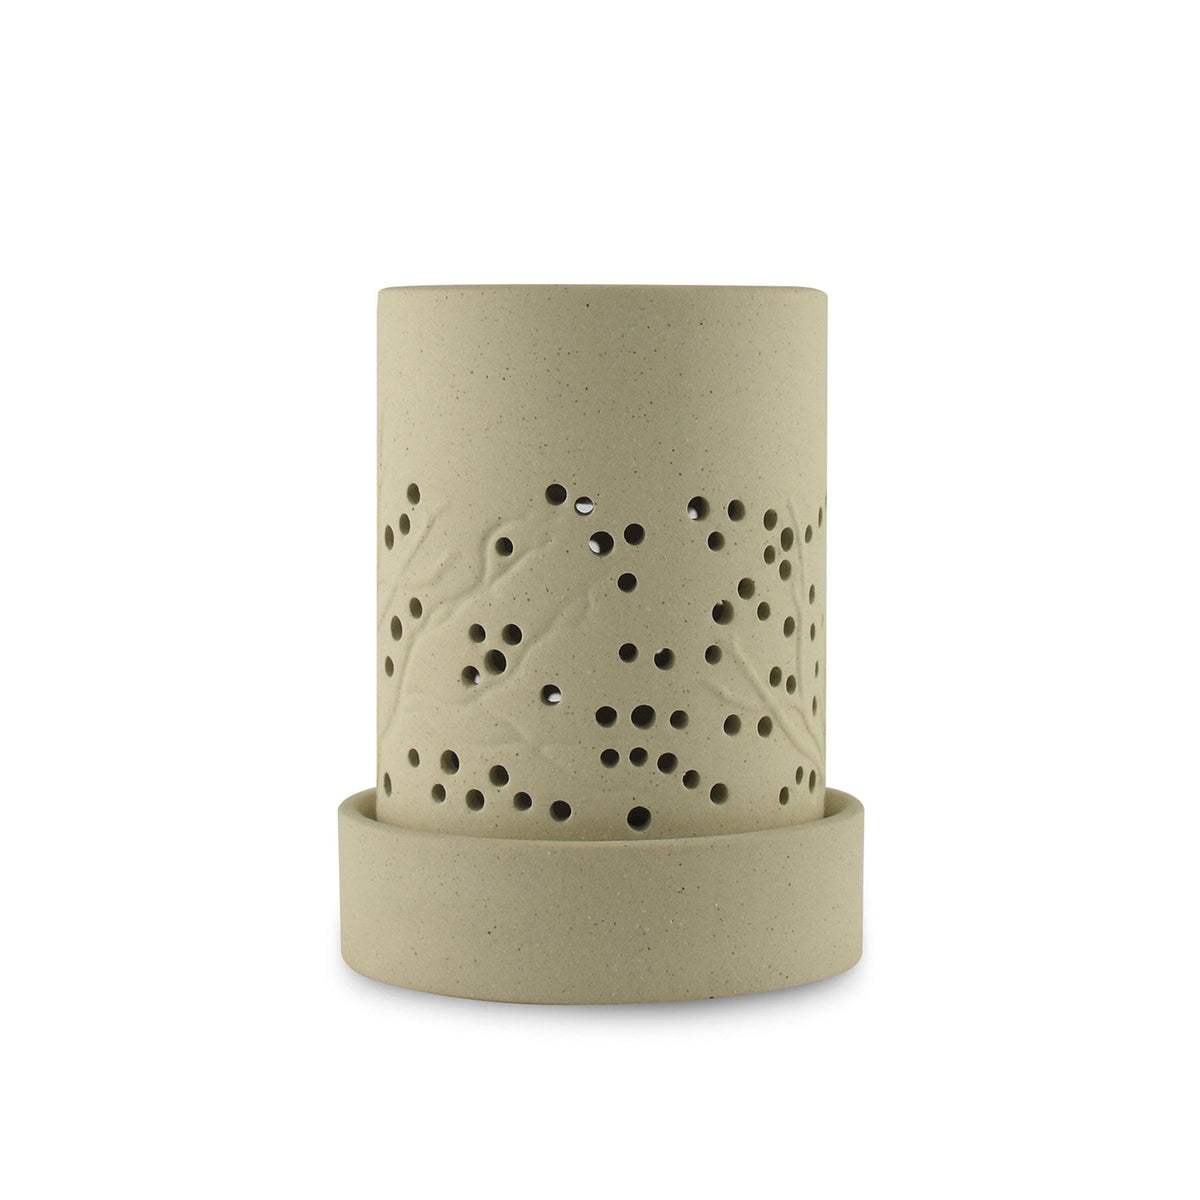 Winter Trees Candle Burner - HYSSES